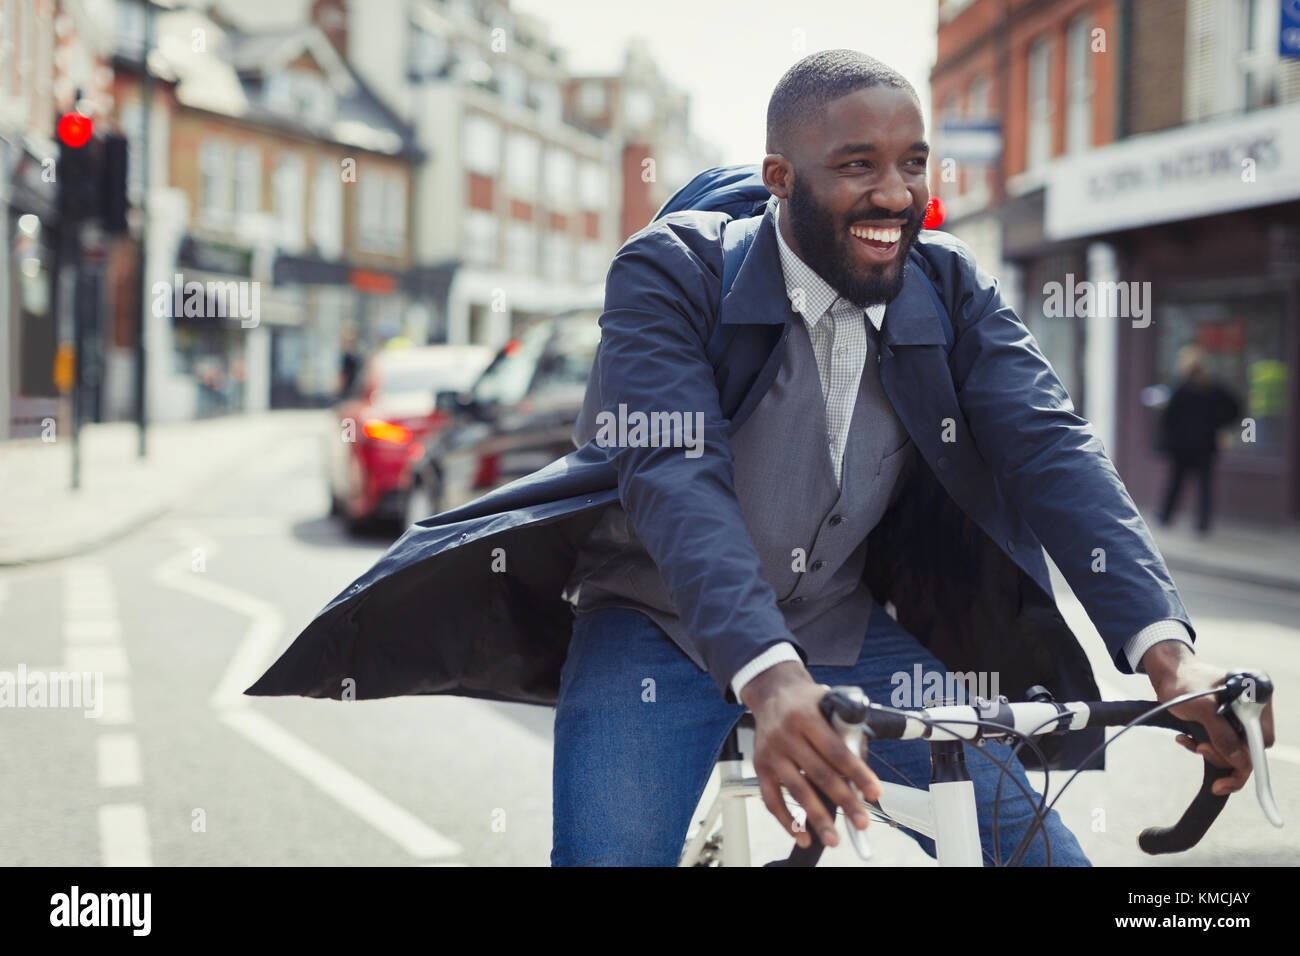 Smiling young businessman commuting, riding bicycle on sunny urban street Stock Photo